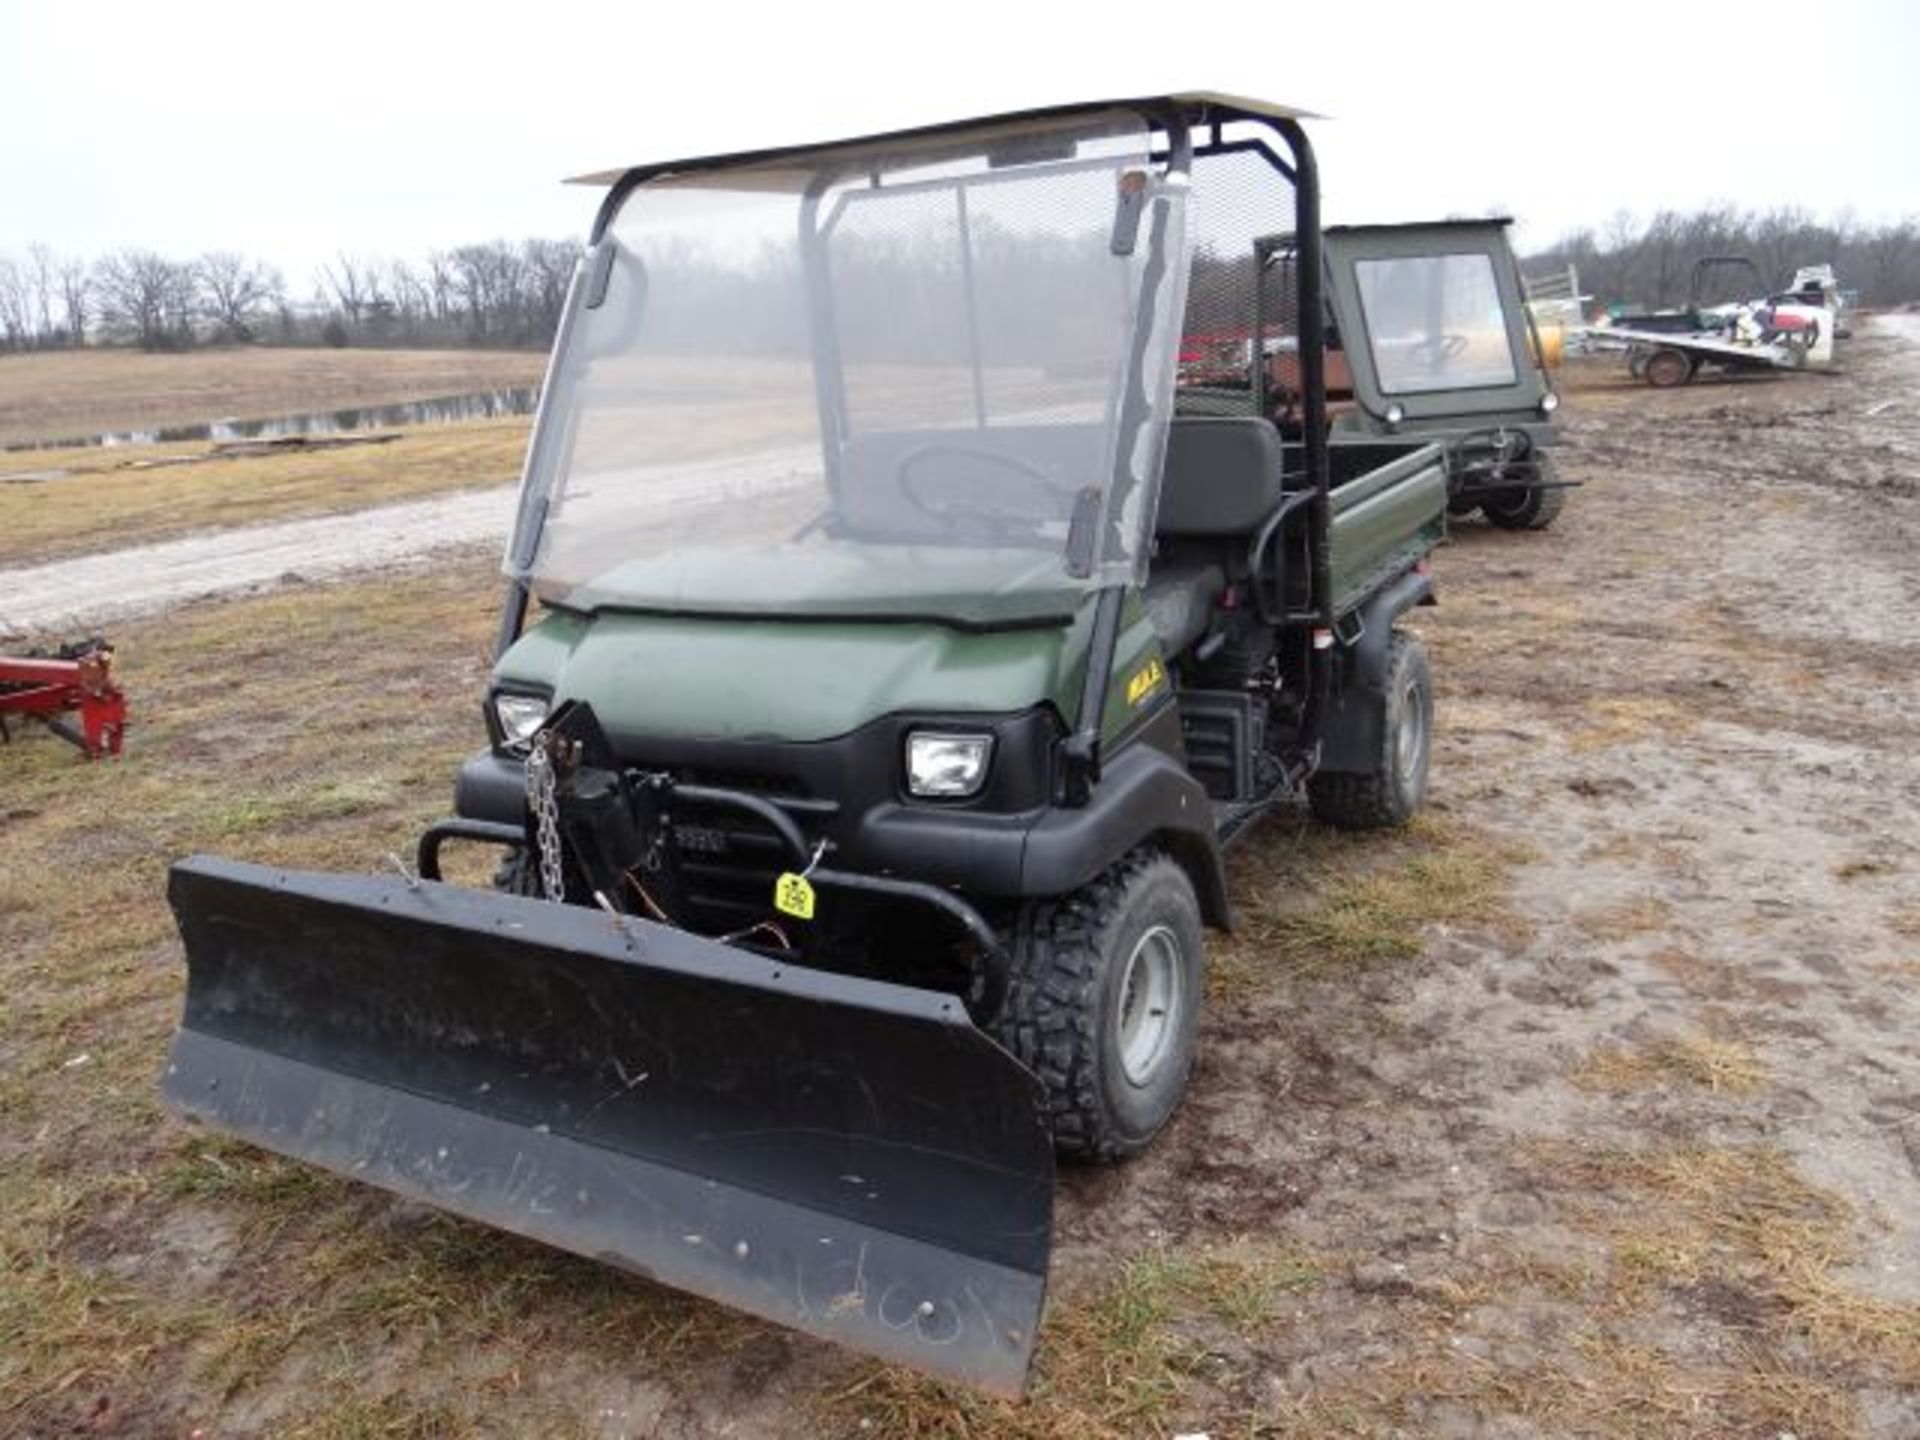 Kawasaki 3010 Mule, 2007 #112654, 960 hrs, Snow Blade, Power Lift, 4wd, Poly Windshield and Roof